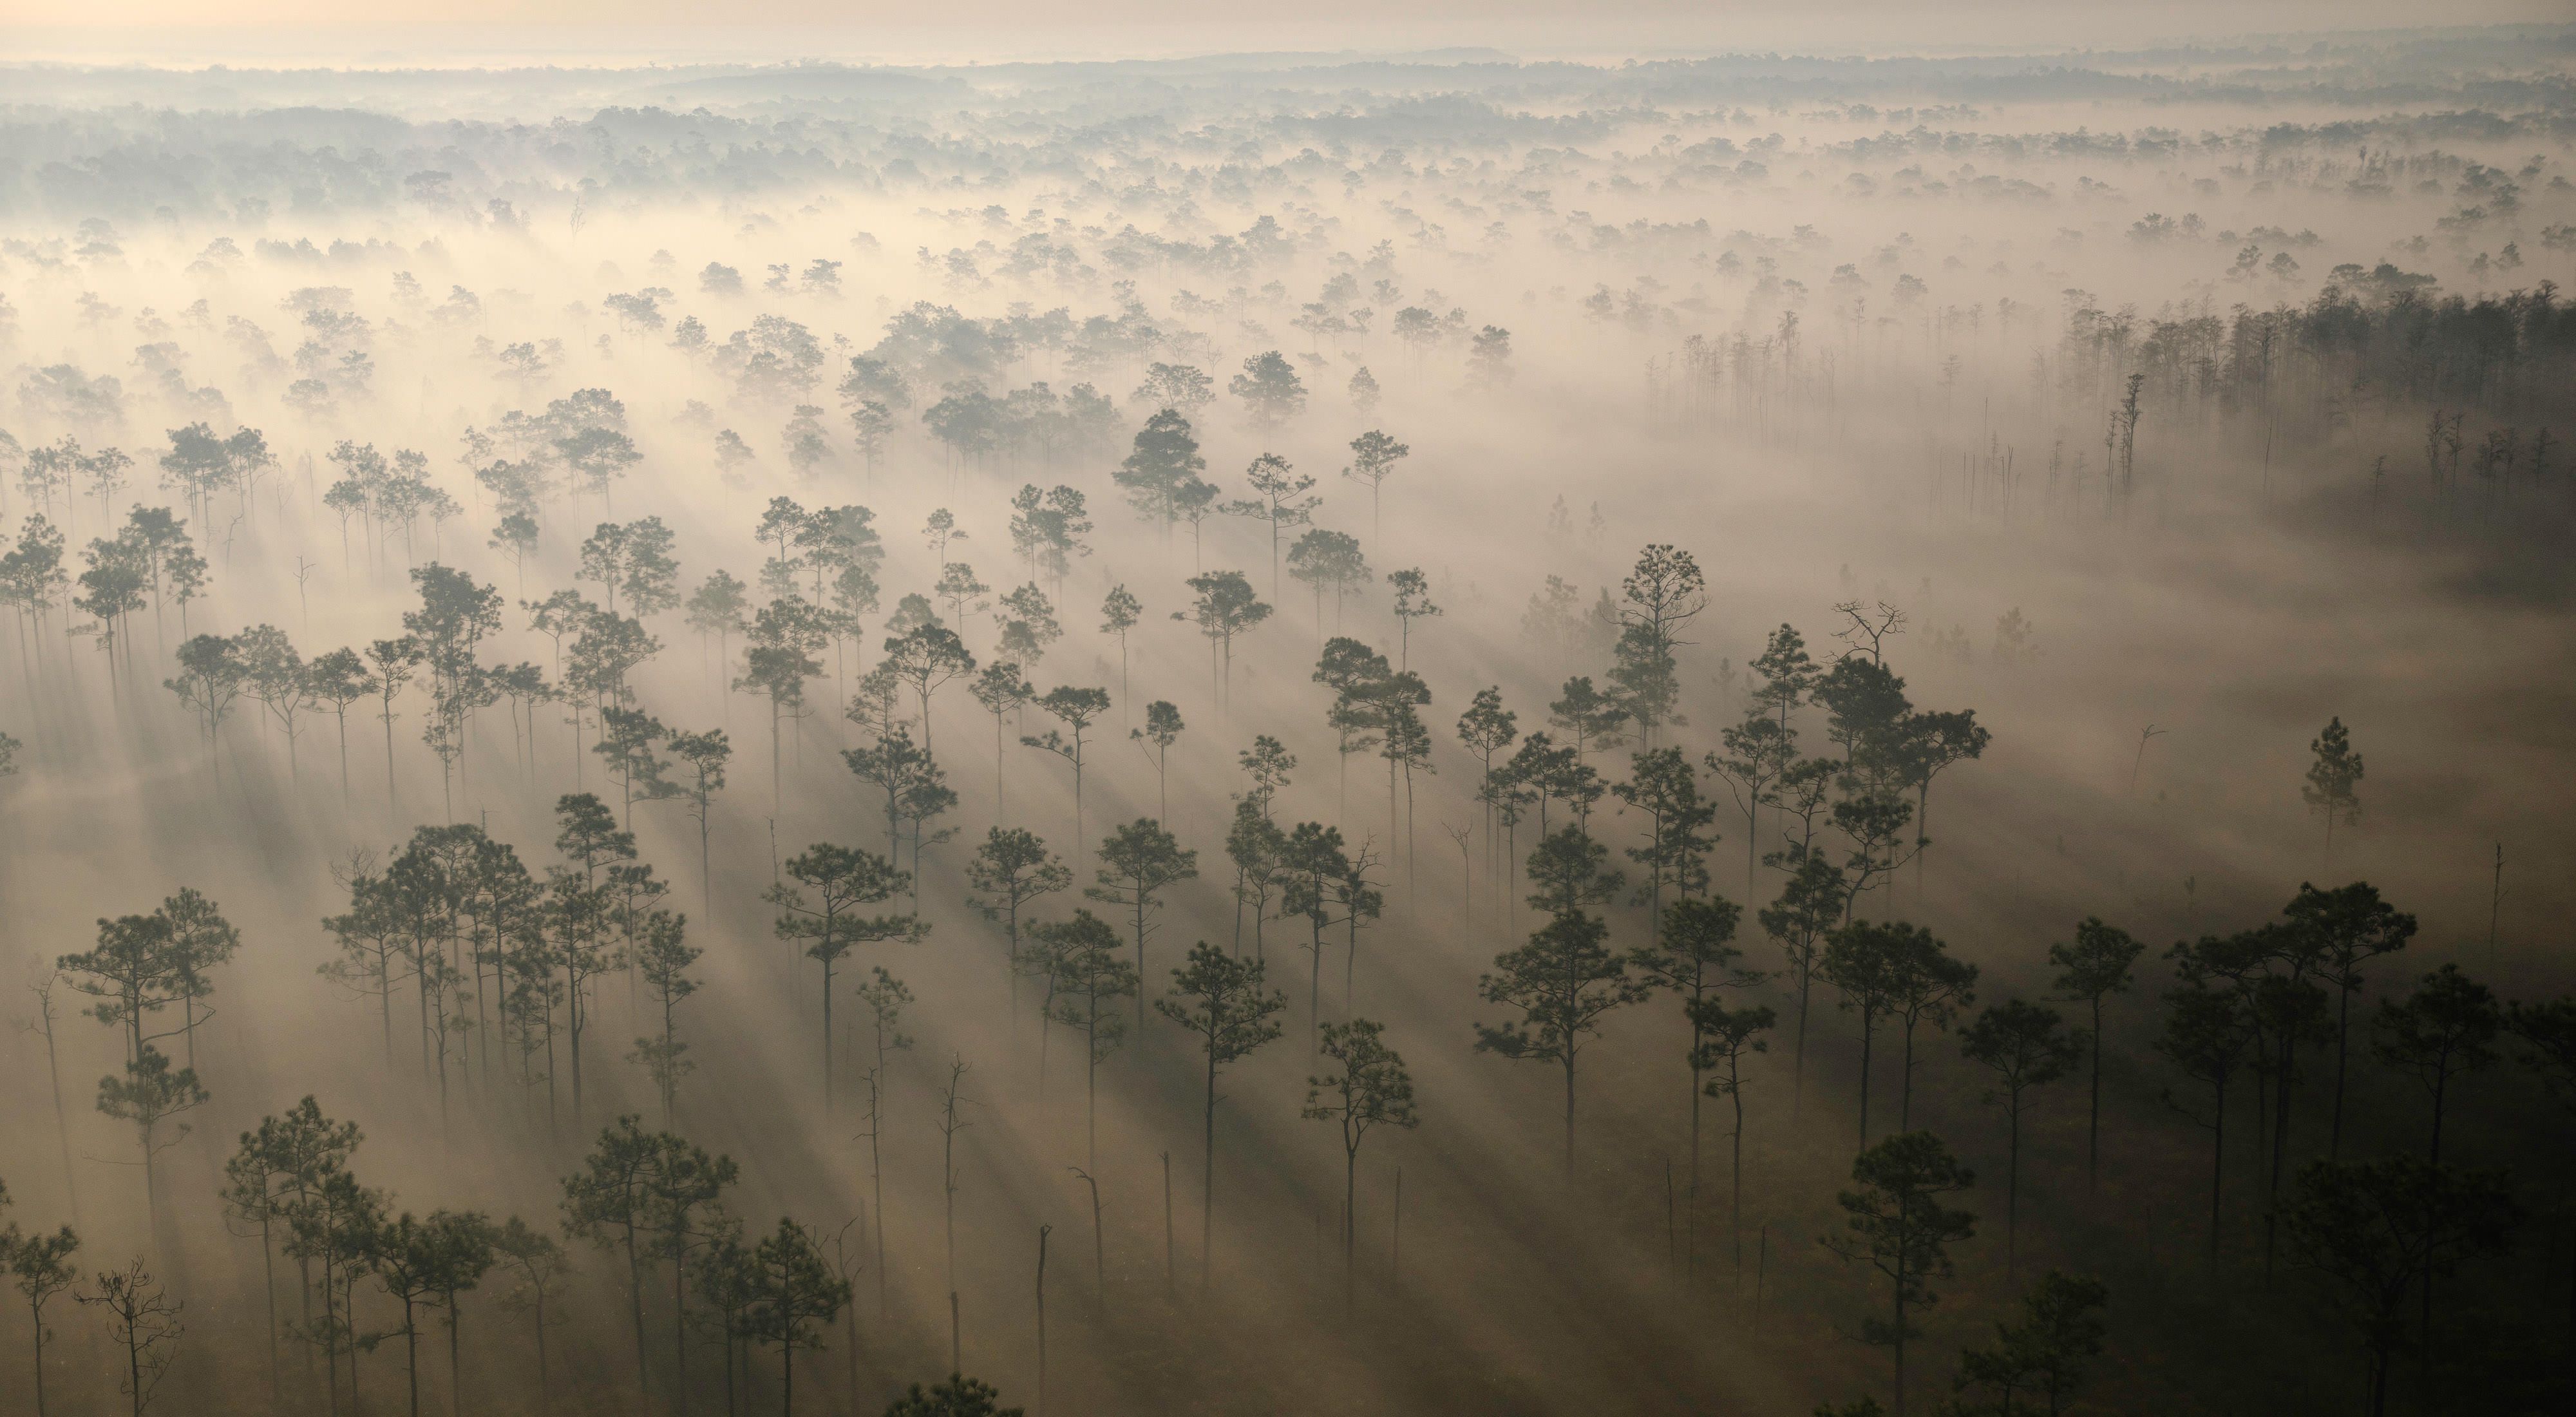 Haze roaming over trees from an aerial view.